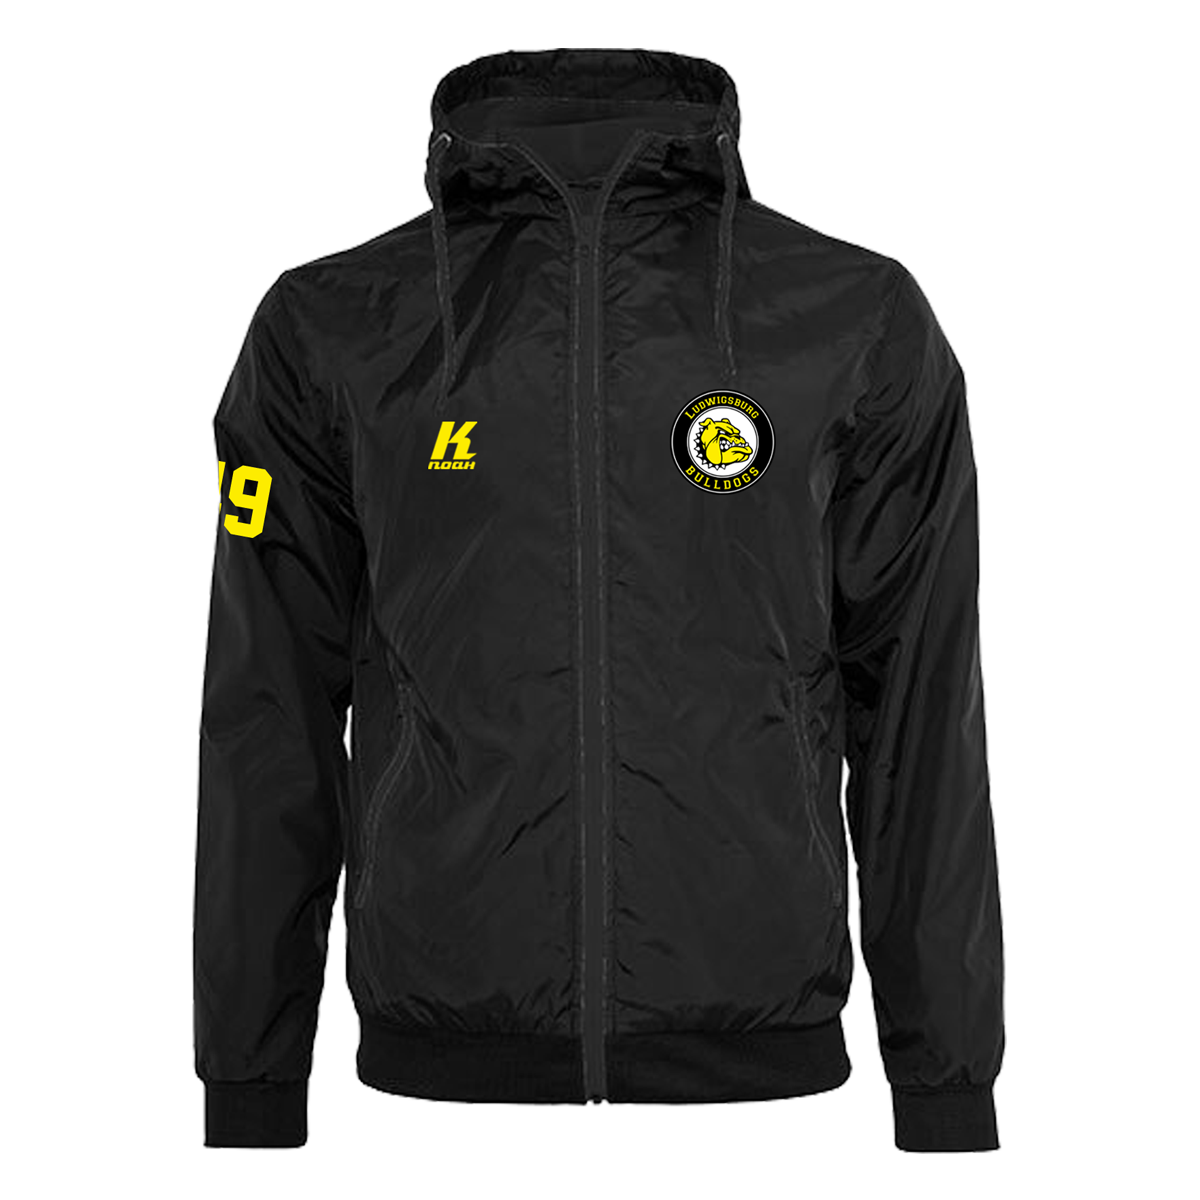 LB-Bulldogs Windrunner Jacket with Playernumber/Initials